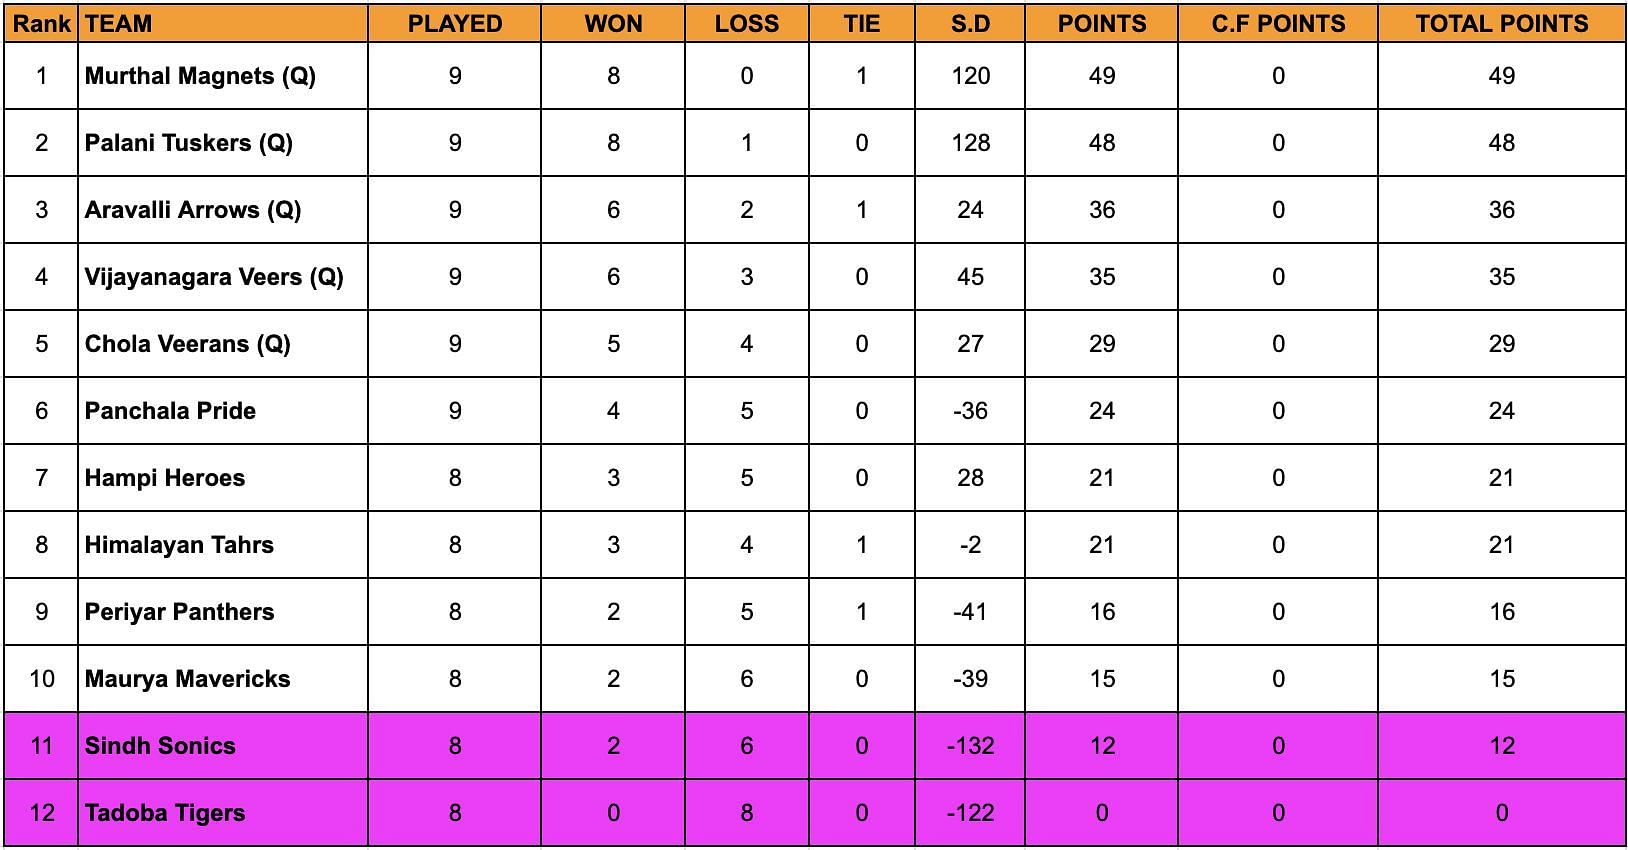 YKS standings after conclusion of Day 12